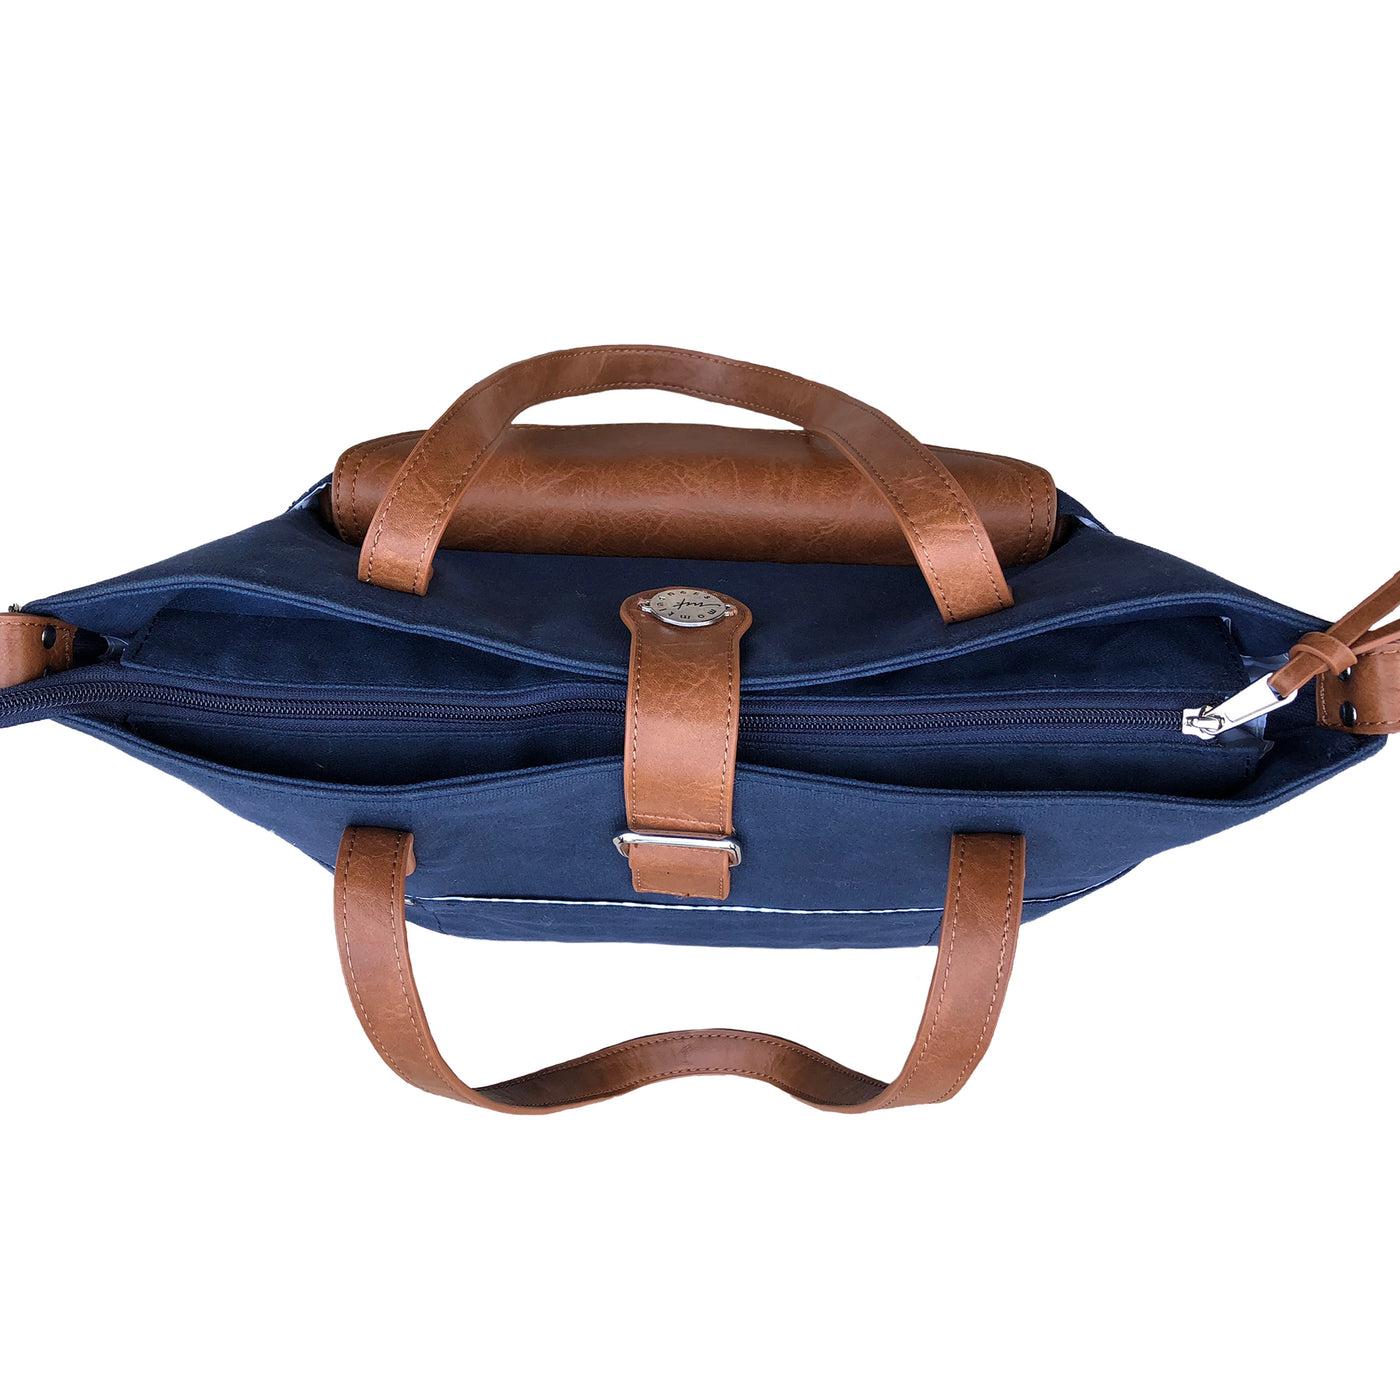 Top down view of navy waxed canvas CarryAll Tote with caramel brown vegan leather accents, zip closed on white background.